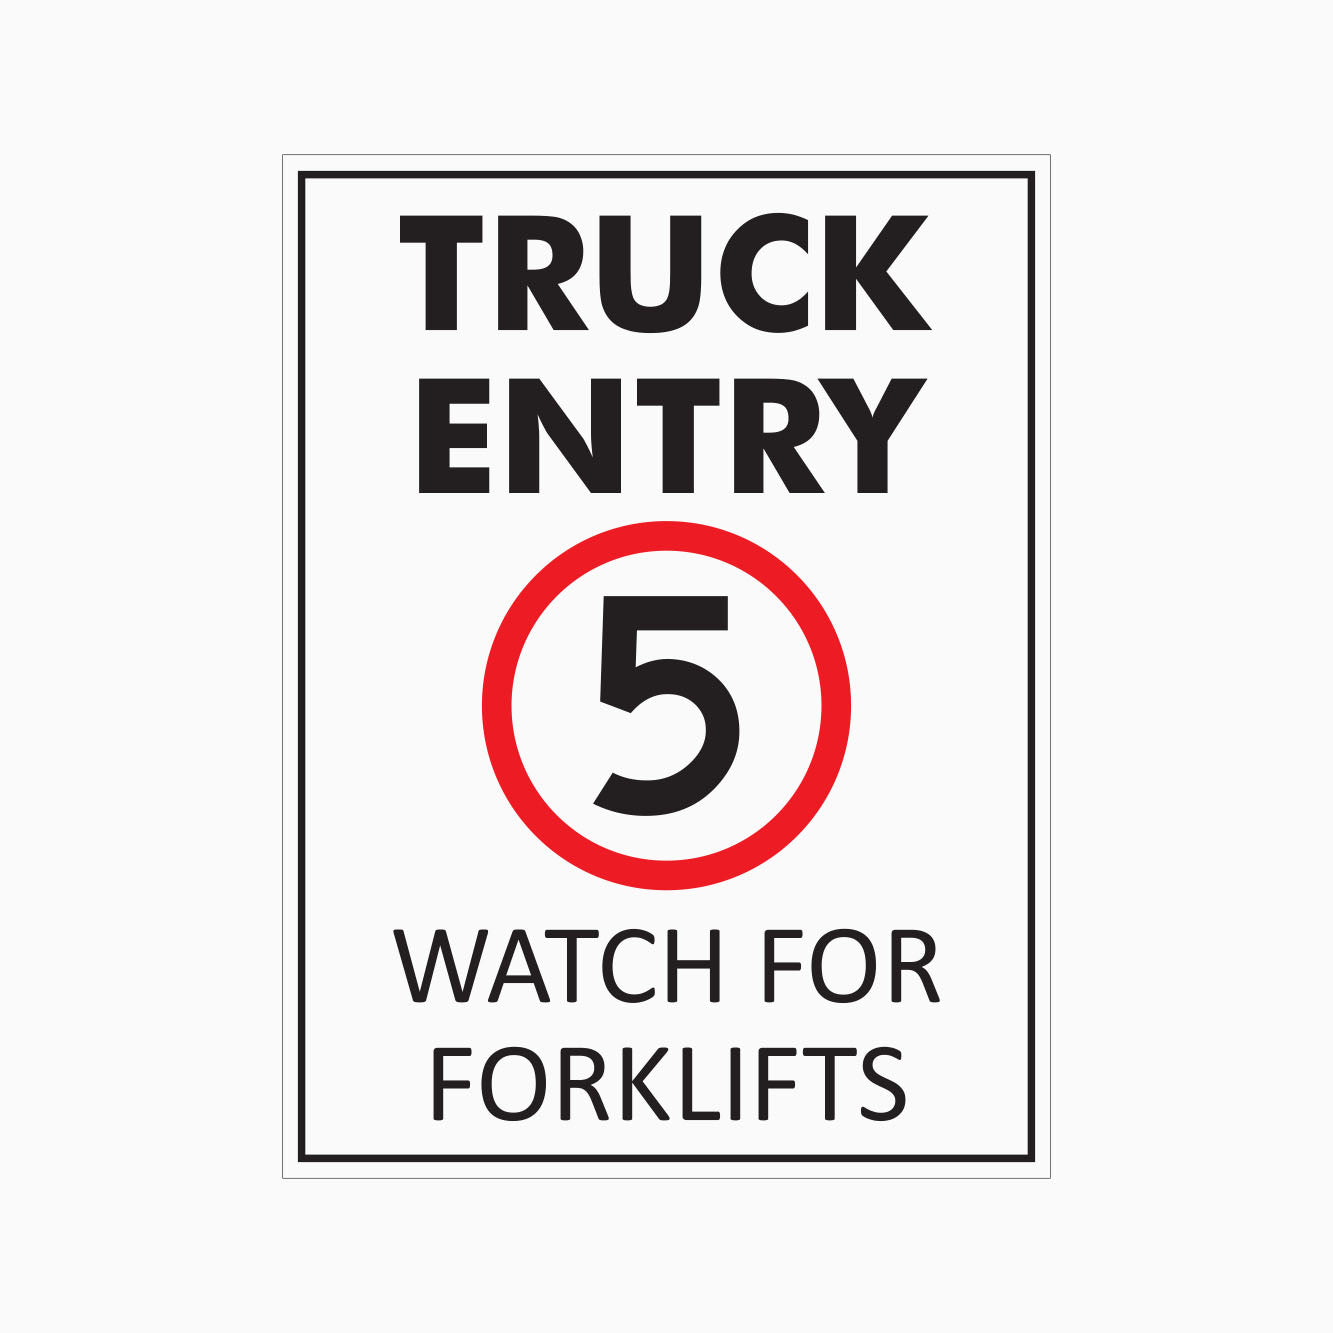 TRUCK ENTRY 5km WATCH FOR FORKLIFTS SIGN